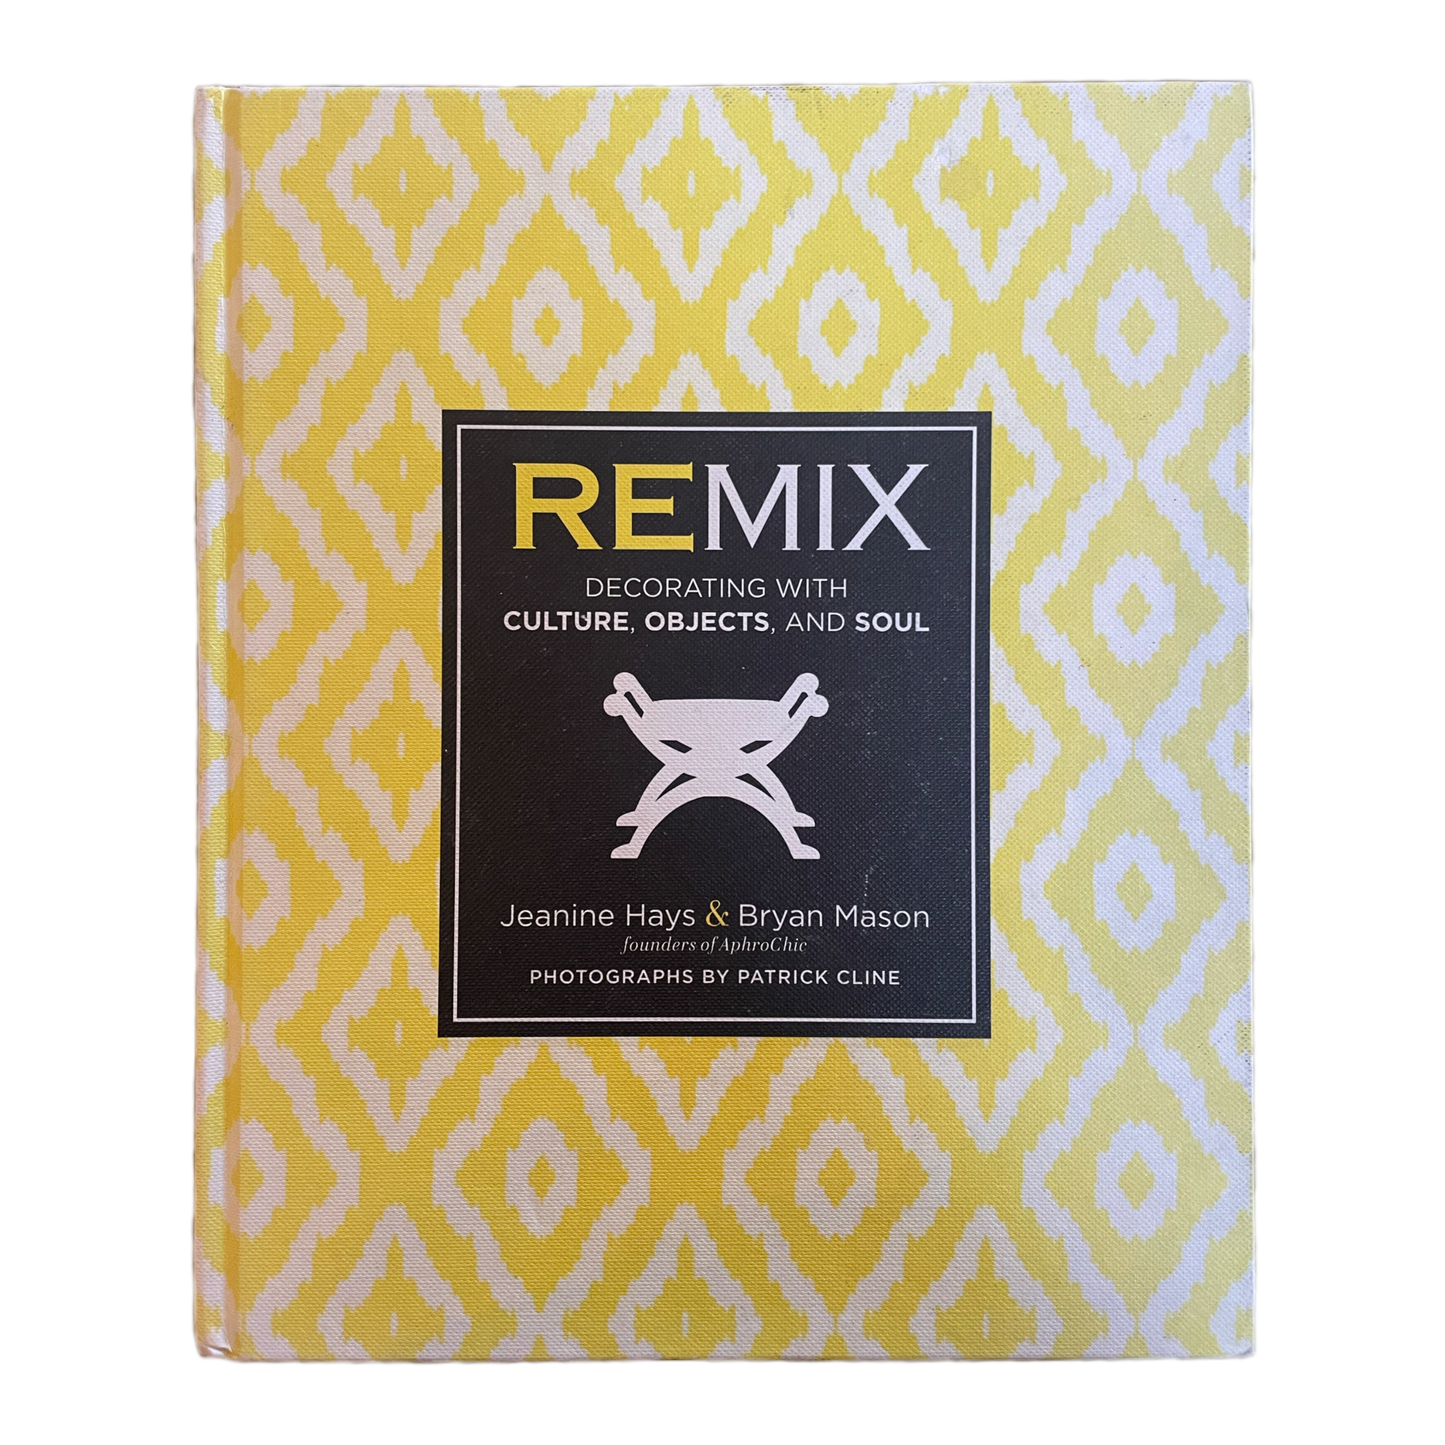 Remix: Decorating with Culture, Objects, and Soul by Jeanine Hays & Bryan Mason